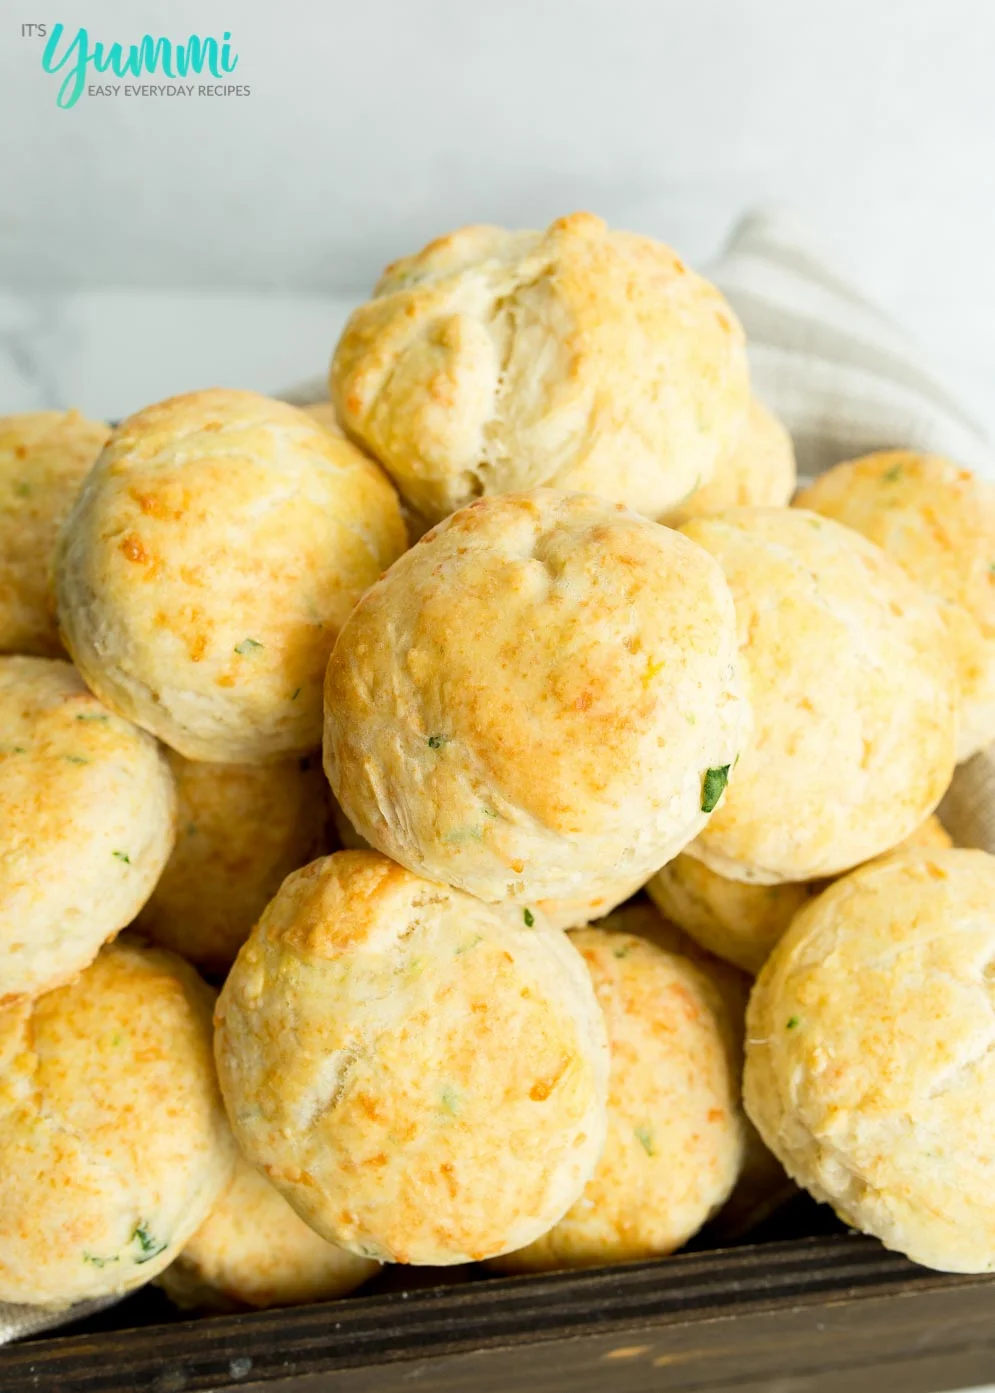 Close-up of Baked Cheddar Bay Biscuits in wooden basket